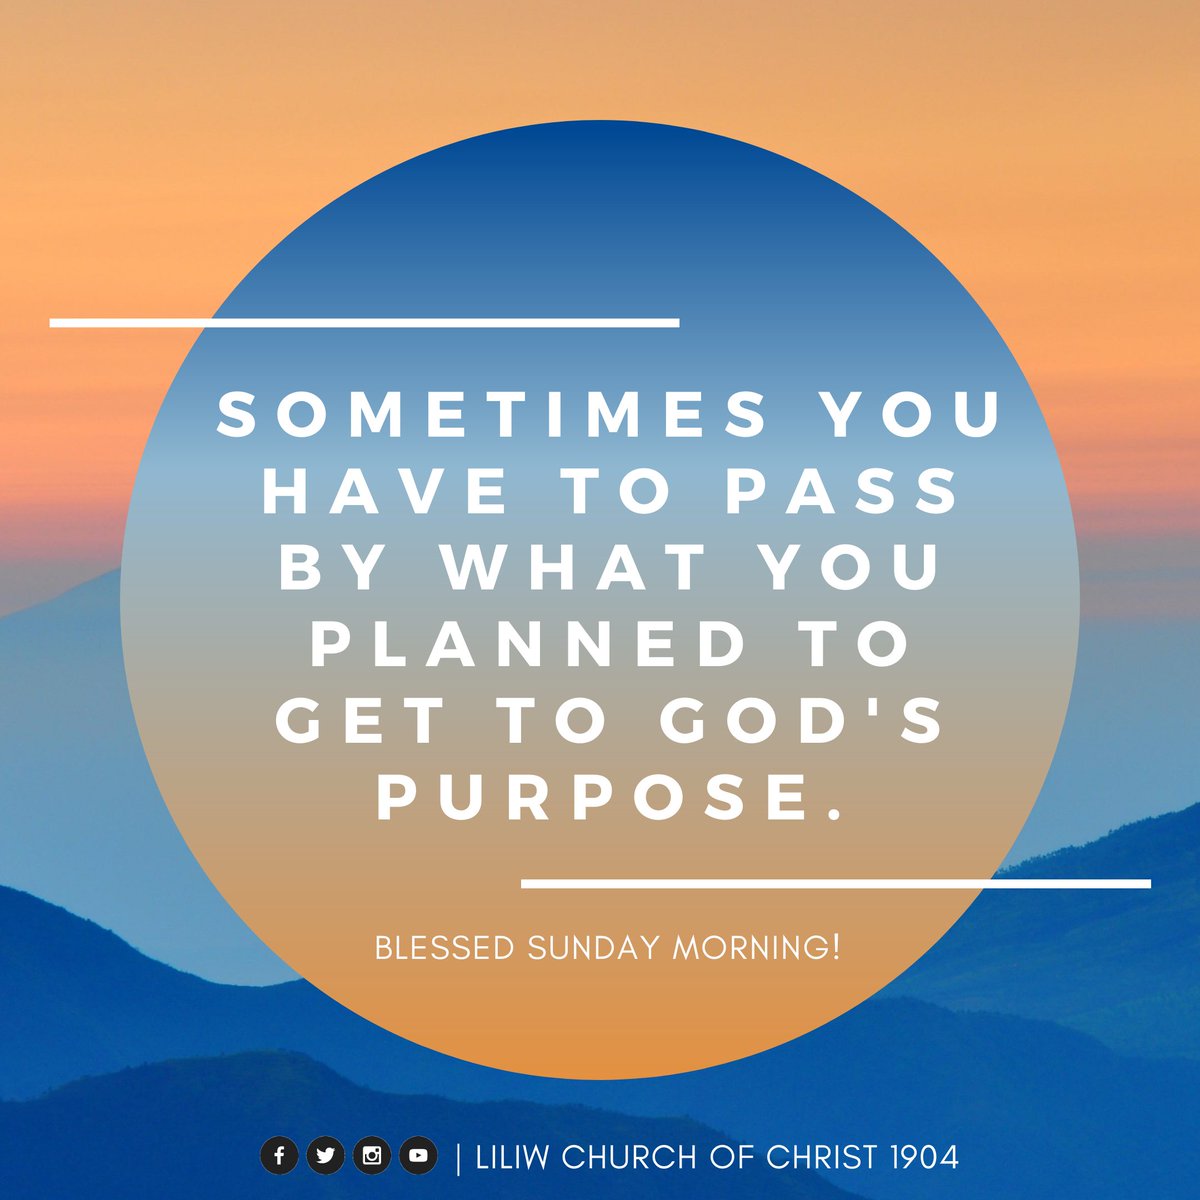 START YOUR DAY BY EMBRACING GOD'S PURPOSE.

God's plans are better than our plans. How can we know His plans and purpose for us? It's by doing our devotion and living His will for us.

#GodsPurposeForYou
#LCOC1904